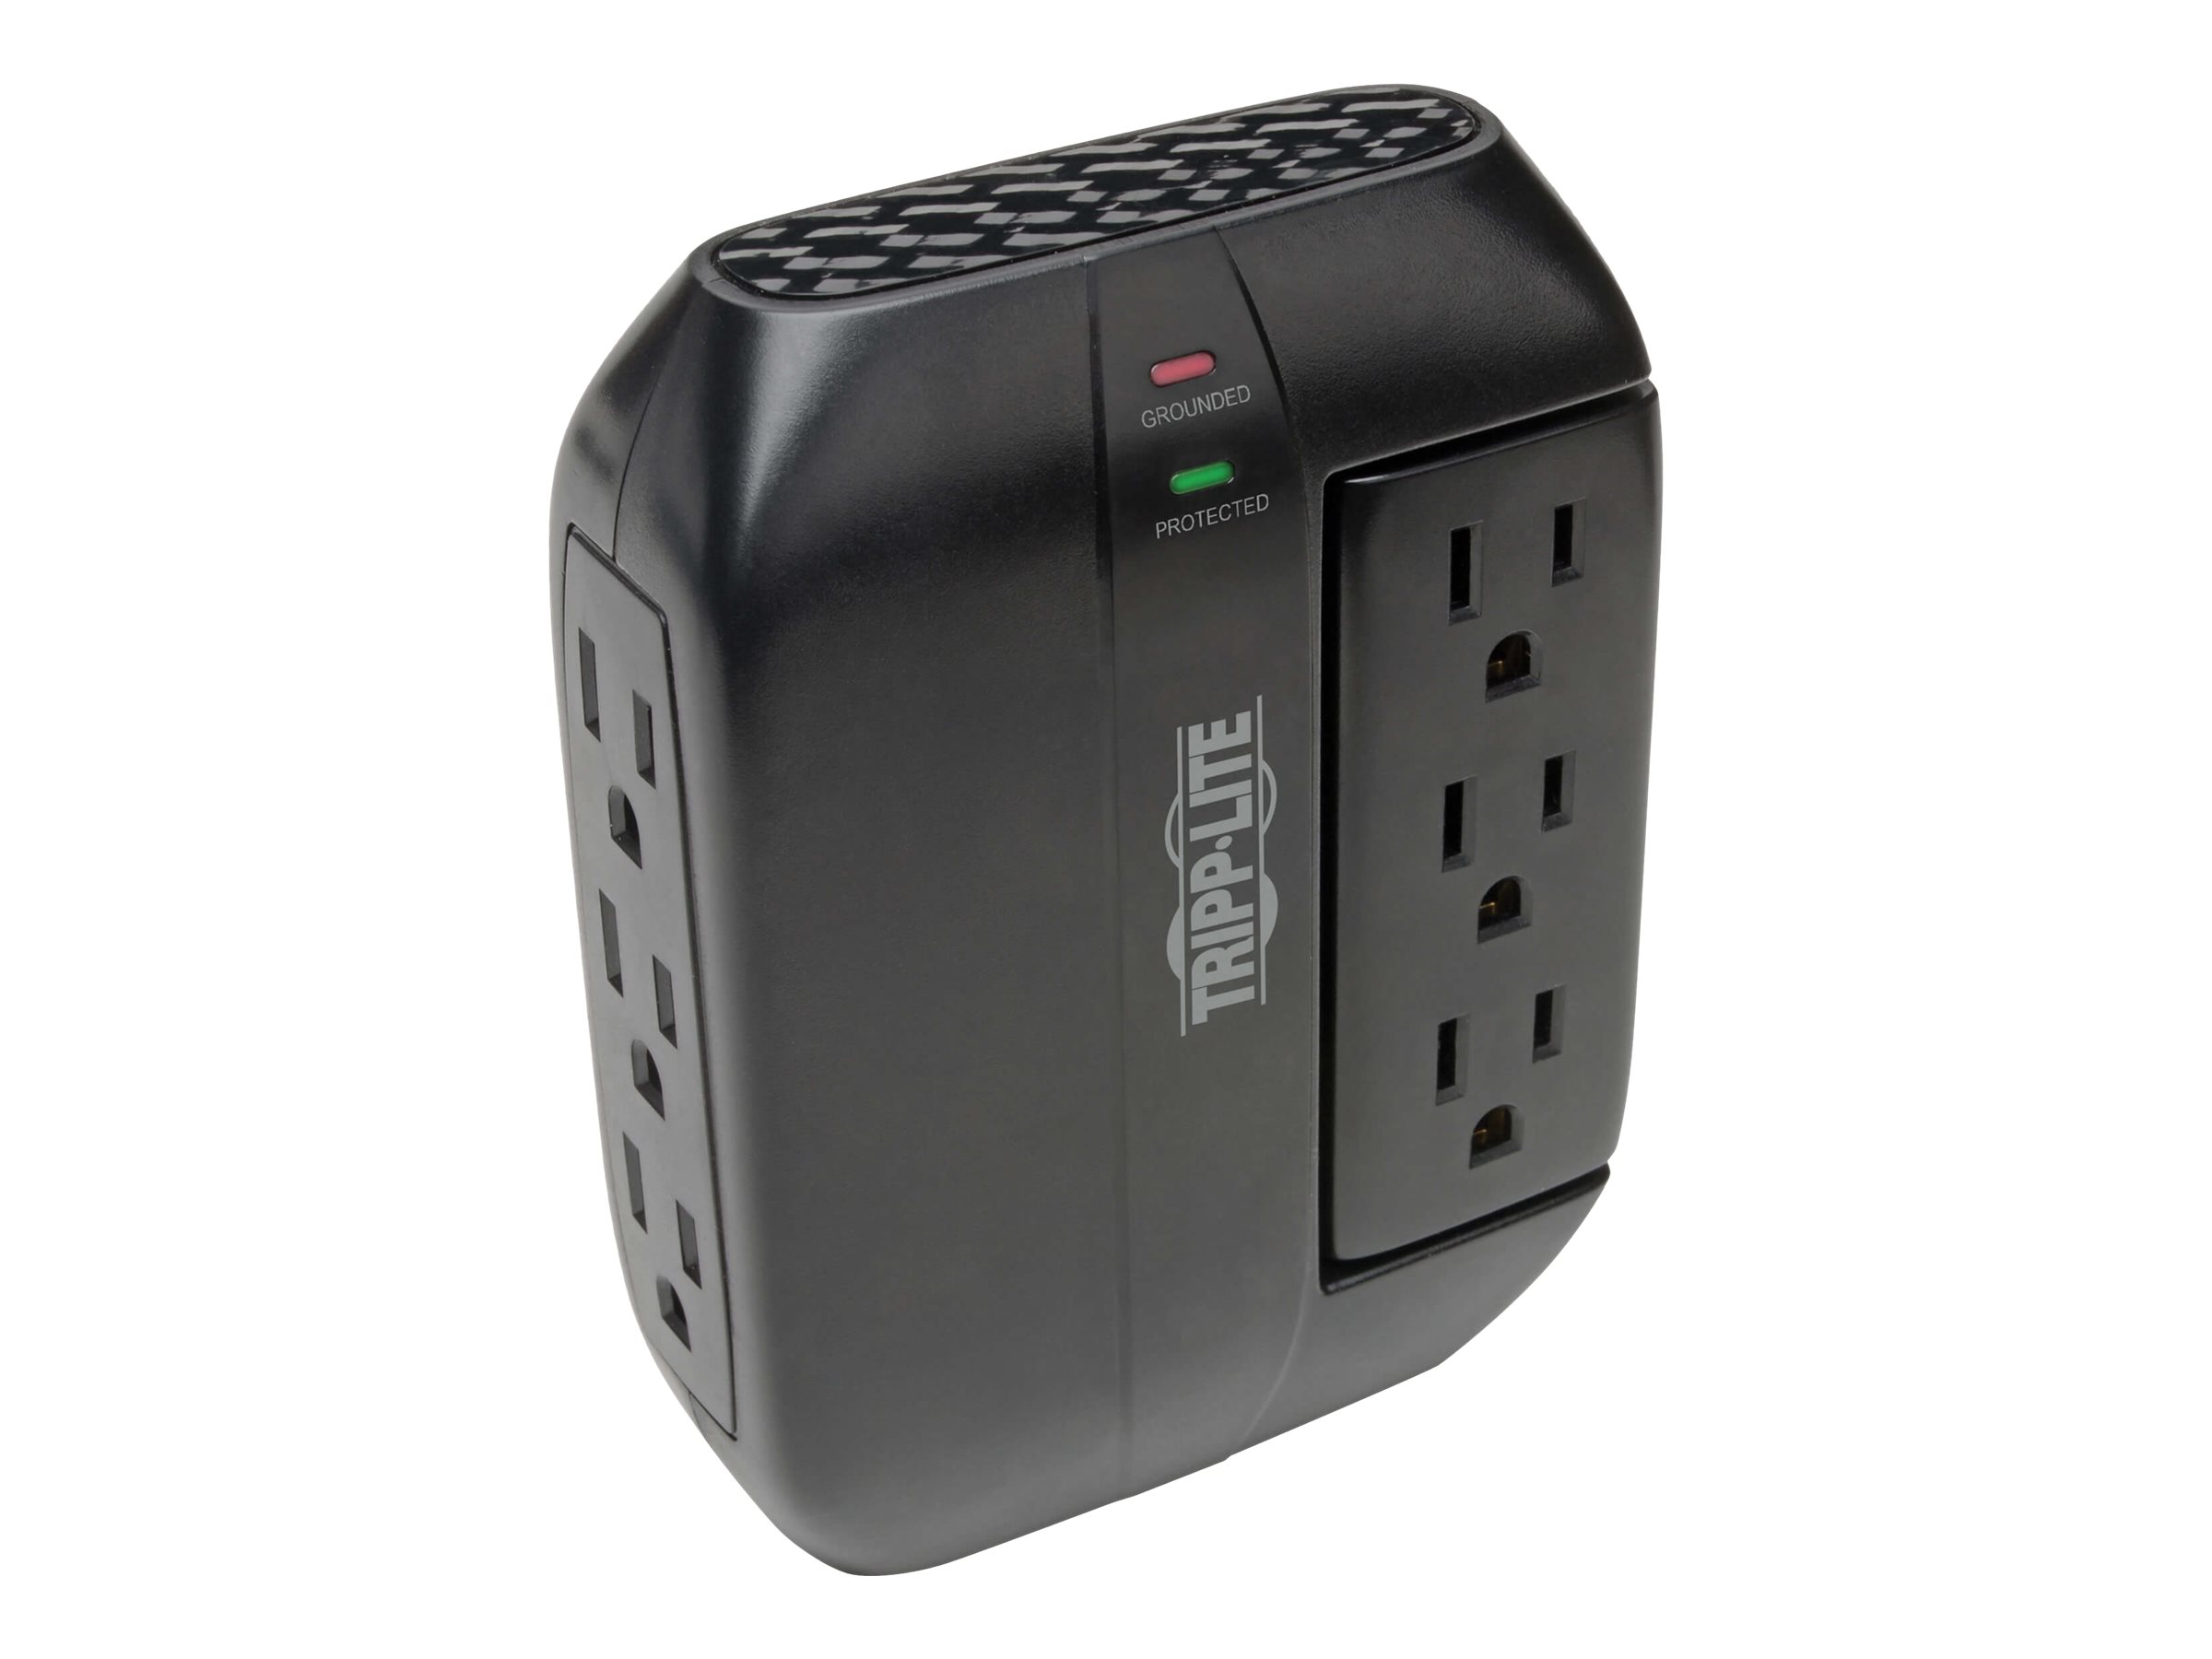 Tripp Lite Surge Protector Swivel 6 Outlet Wallmount Direct Plug In 120V 1200 Joules Black